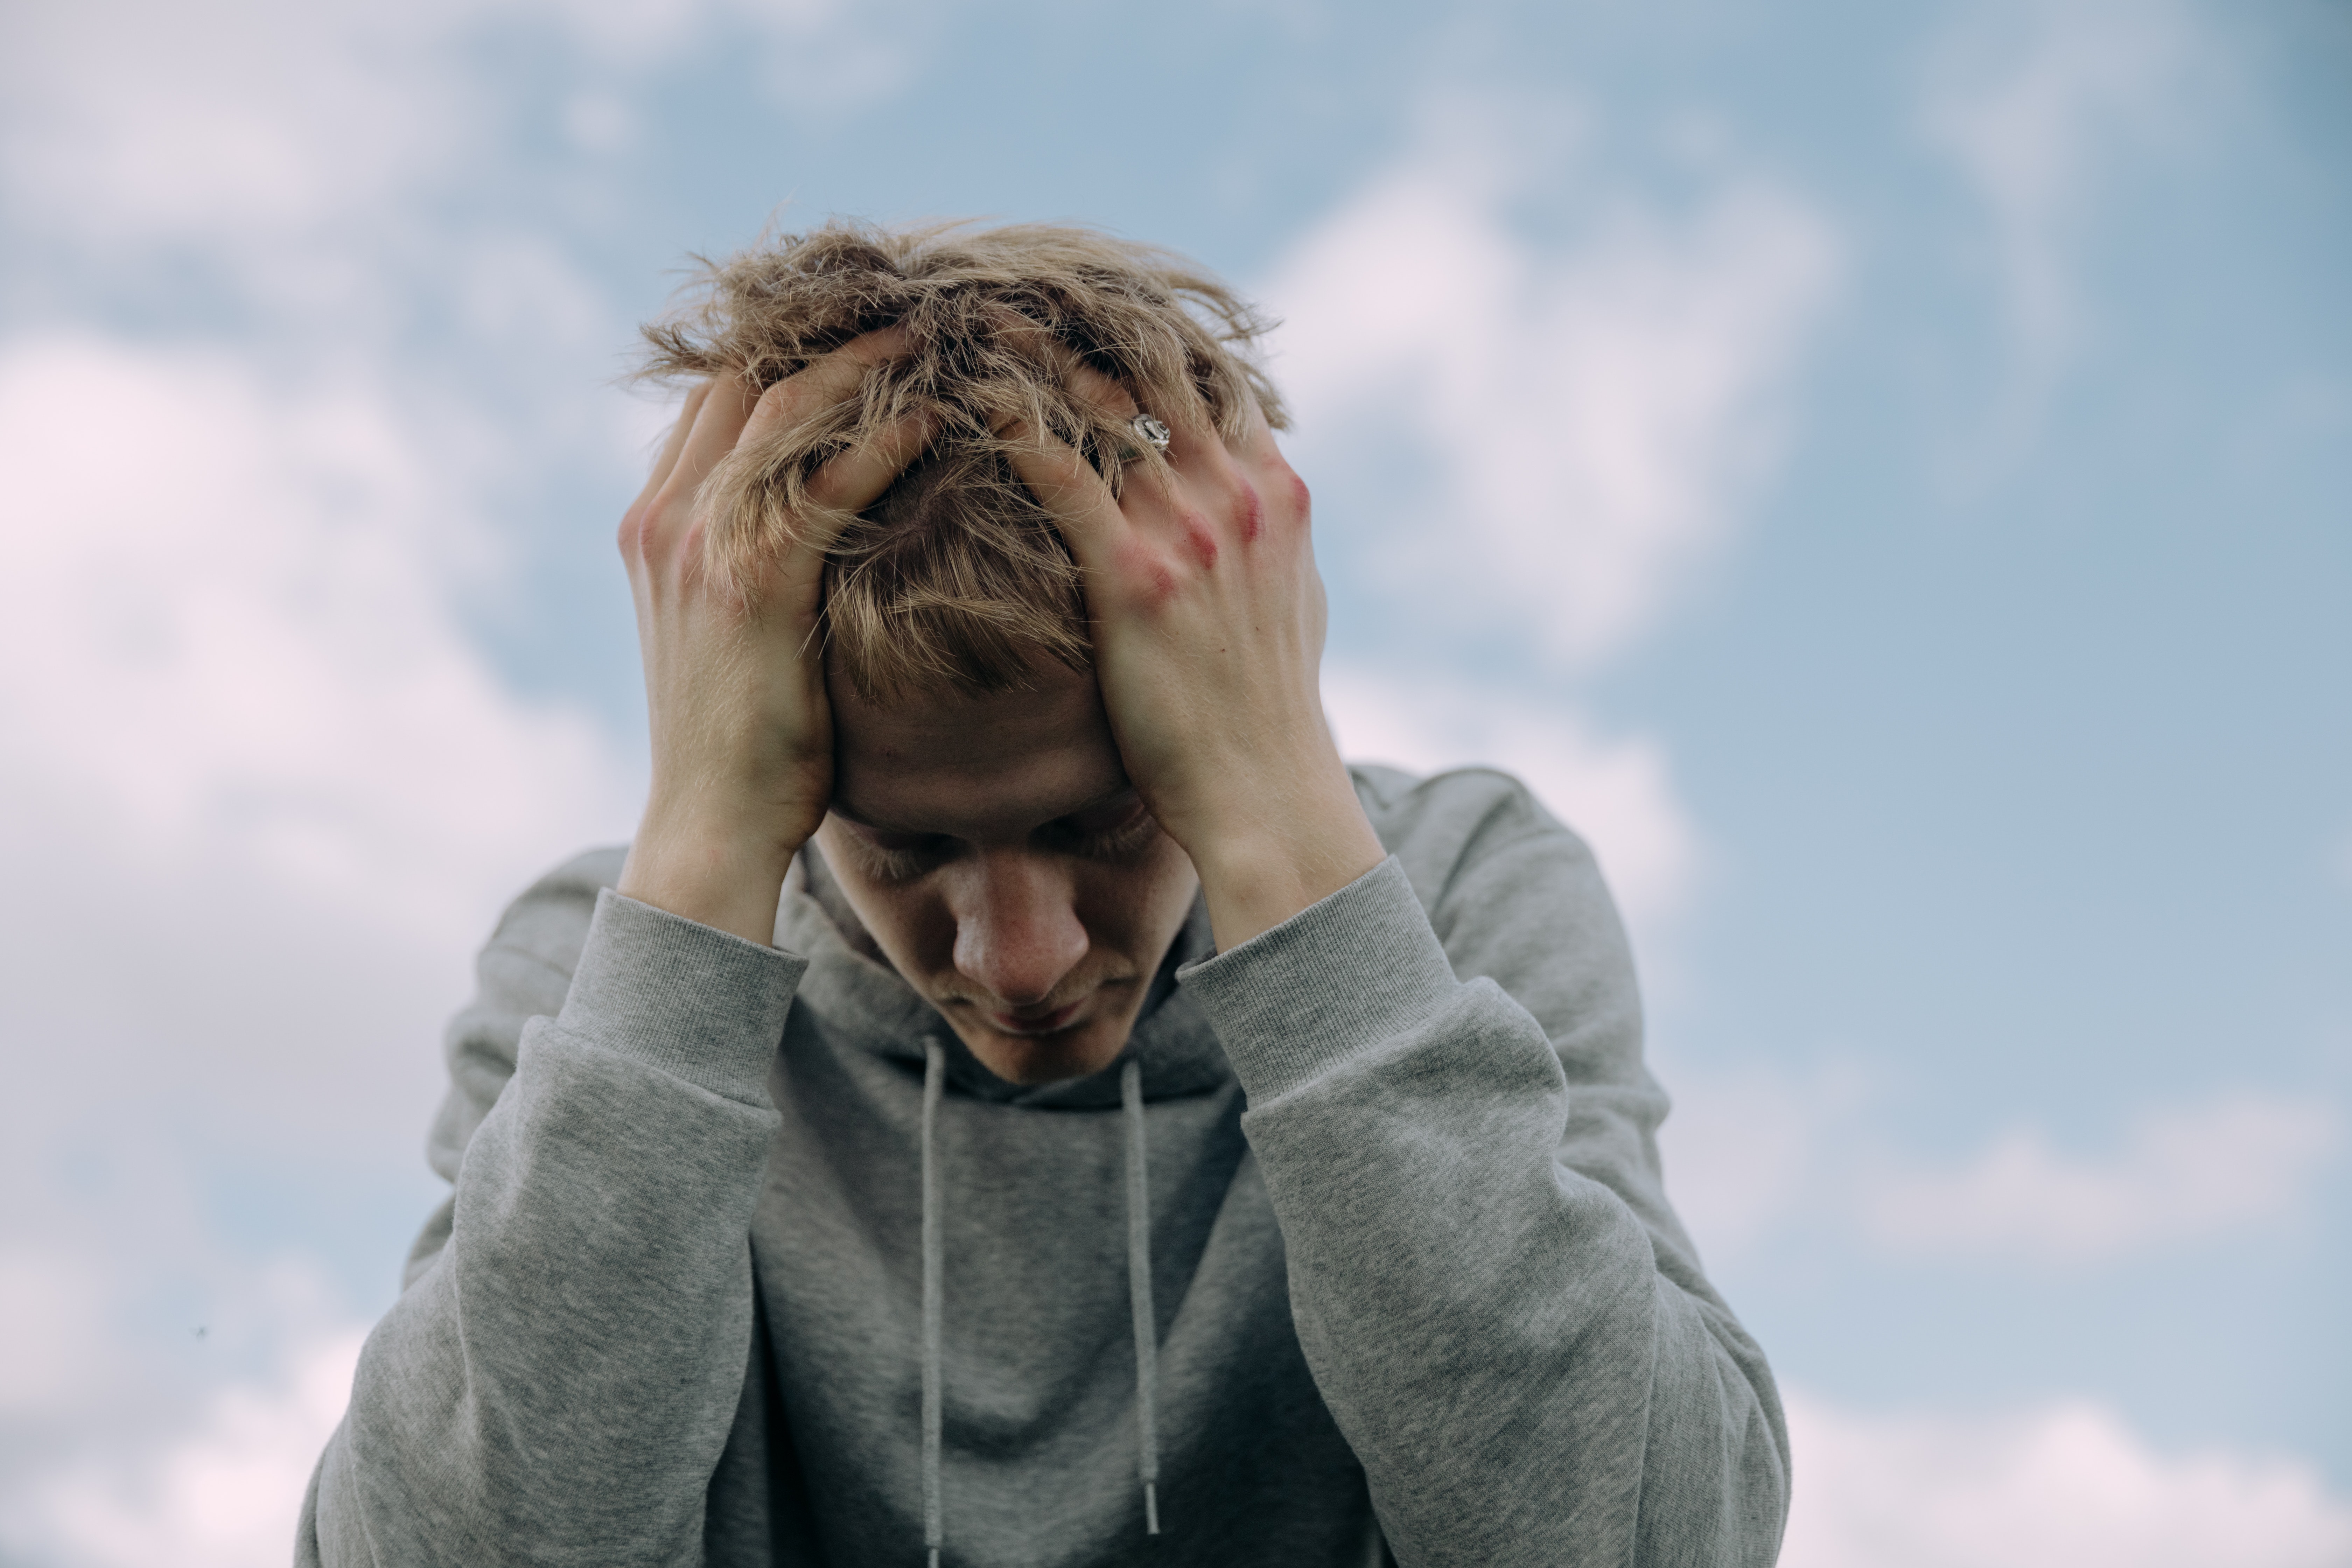 Tips On How To Properly Deal With Anxiety